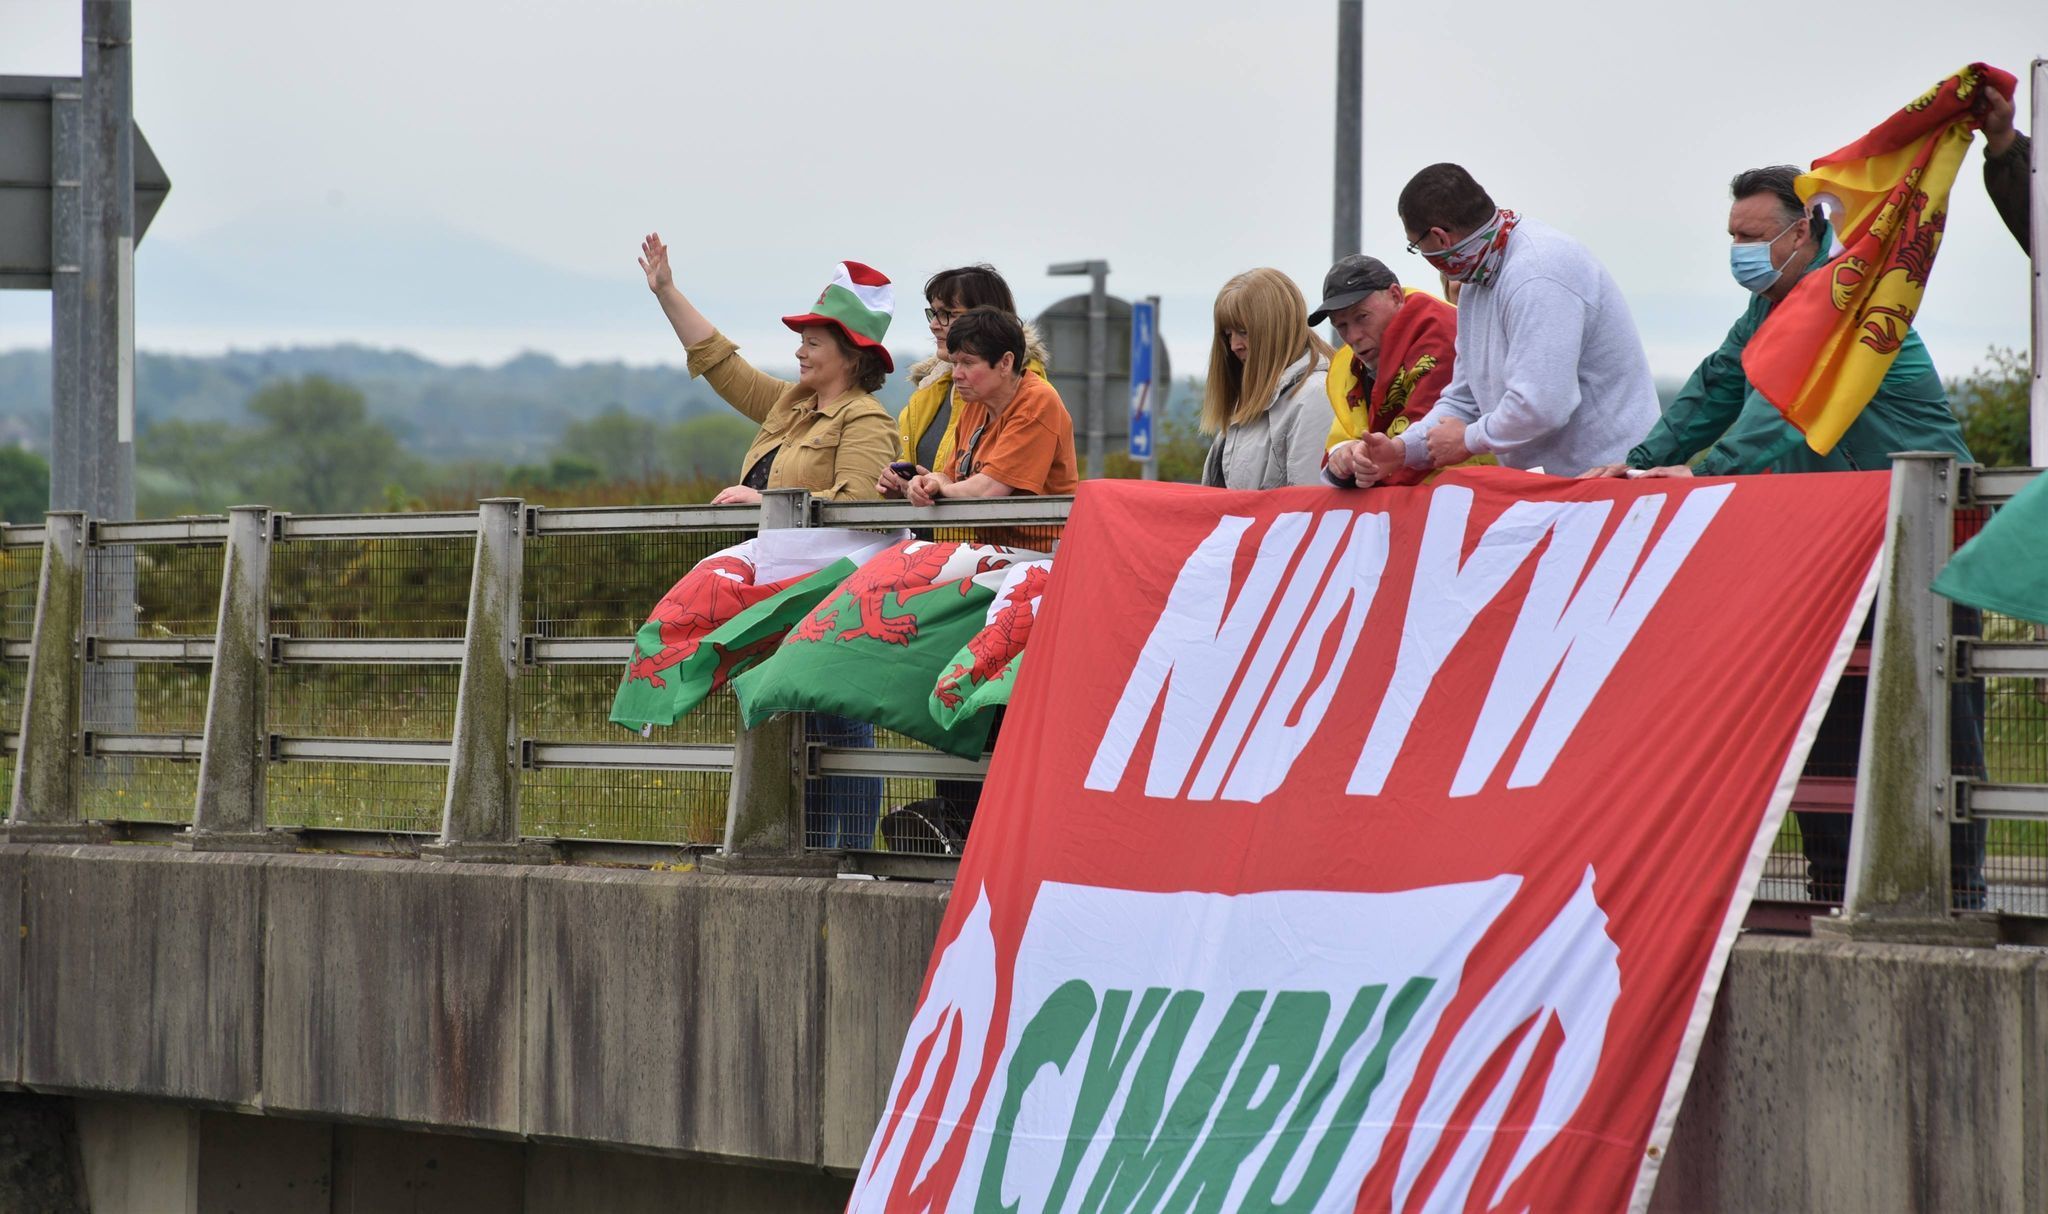 A demonstration against second homes on the A55 through Anglesey on Saturday, May 29. Photo - Wynne Evans.